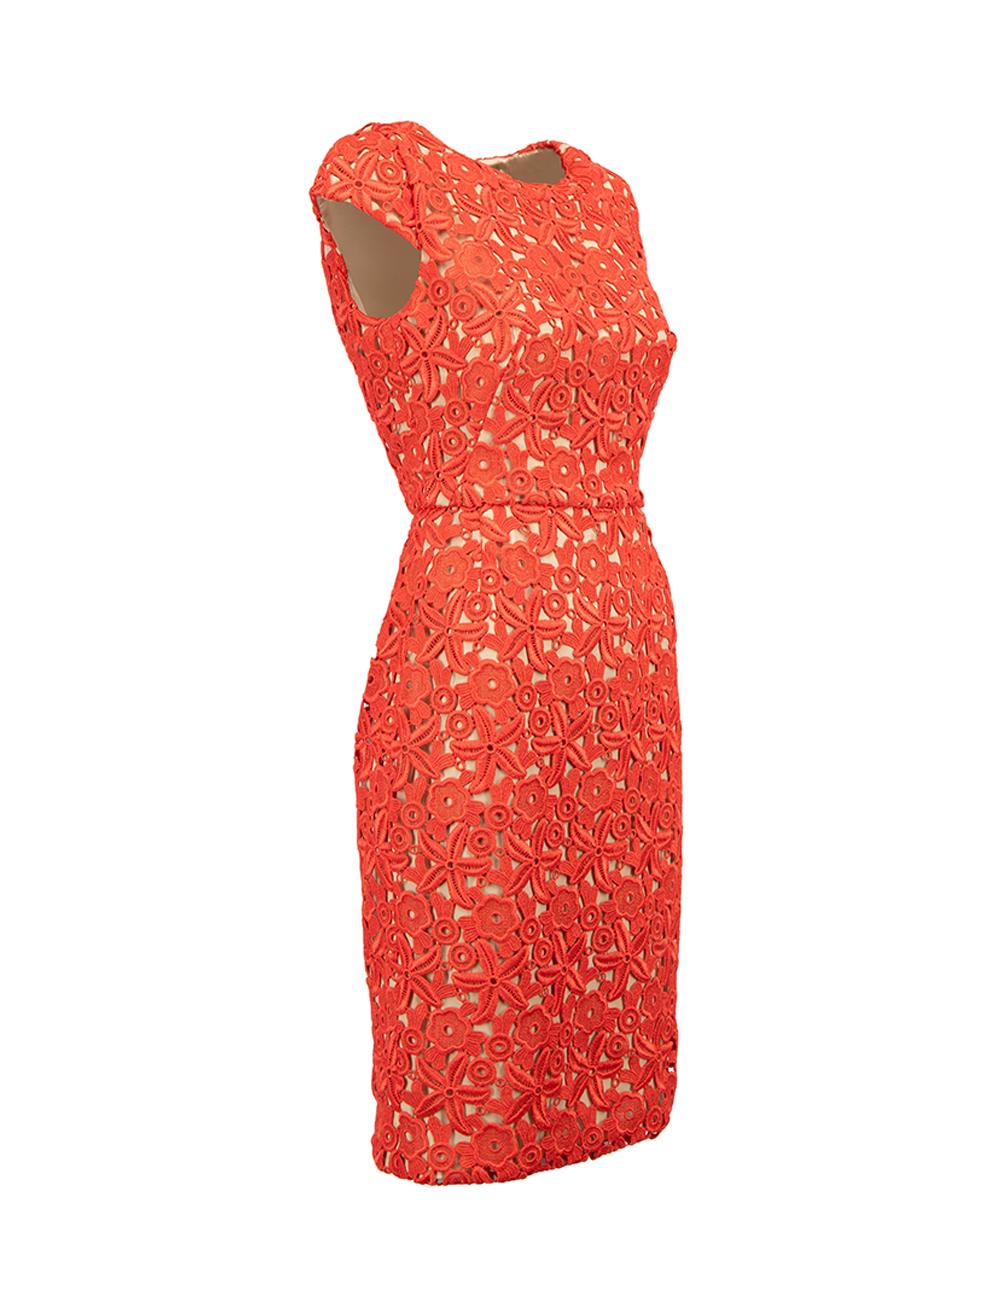 CONDITION is Very good. Minimal wear to dress is evident. A small stain to lining of back neckline is evident on this used Issa London designer resale item.



Details


Red

Lace

Knee length dress

Floral pattern

Round neckline

Short cap